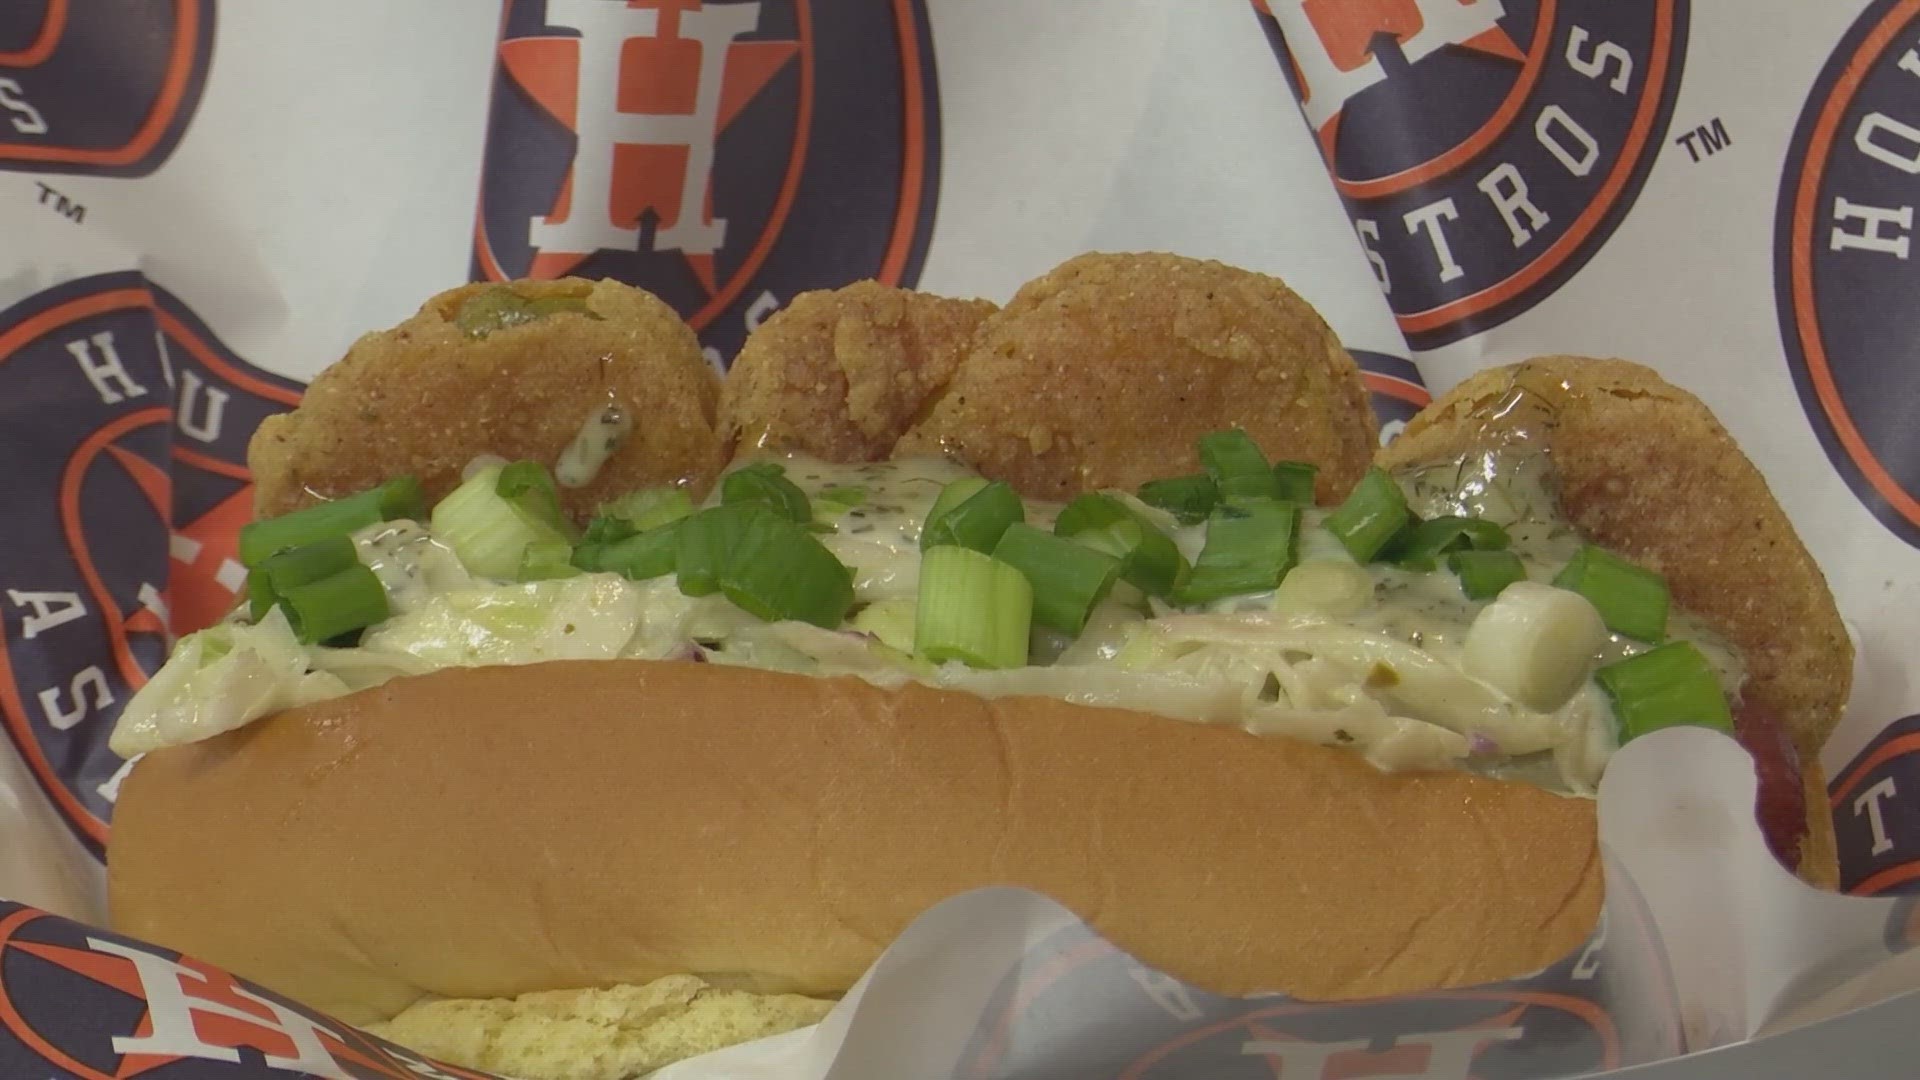 Fans who are headed to Minute Maid Park to cheer on the Houston Astros in the playoffs are going to see some tempting new treats for their taste buds.